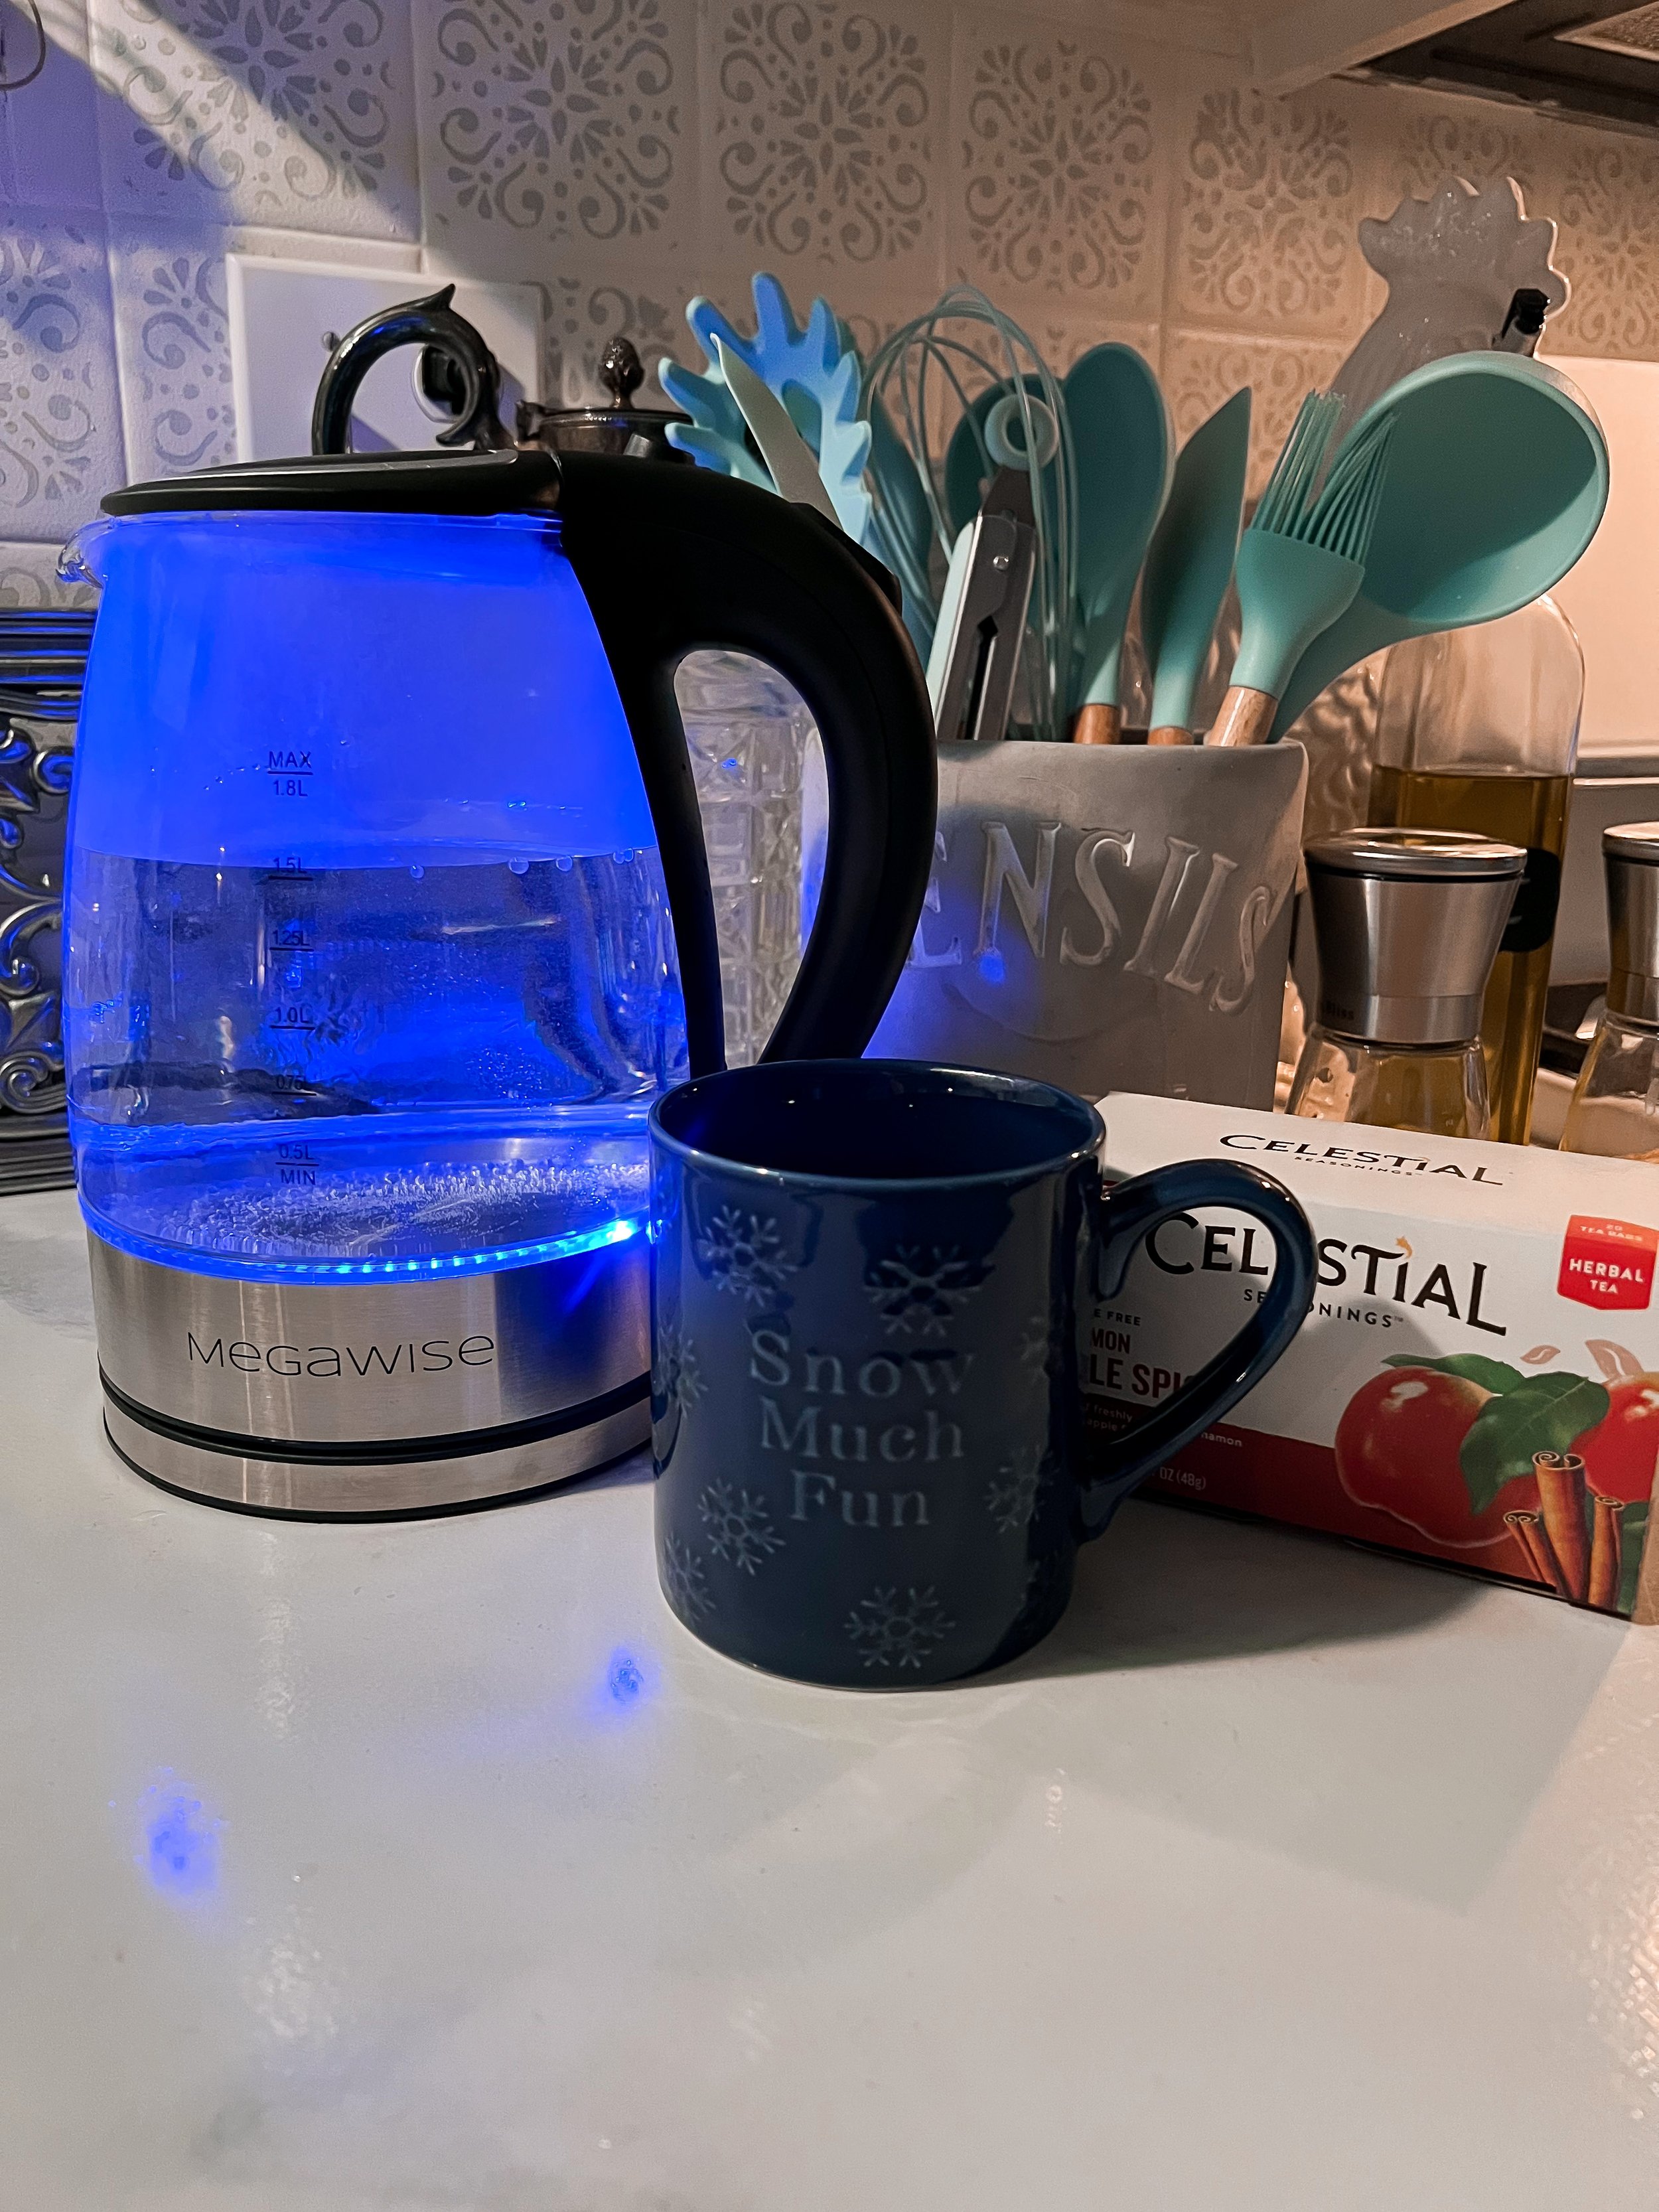 Megawise Electric Kettle